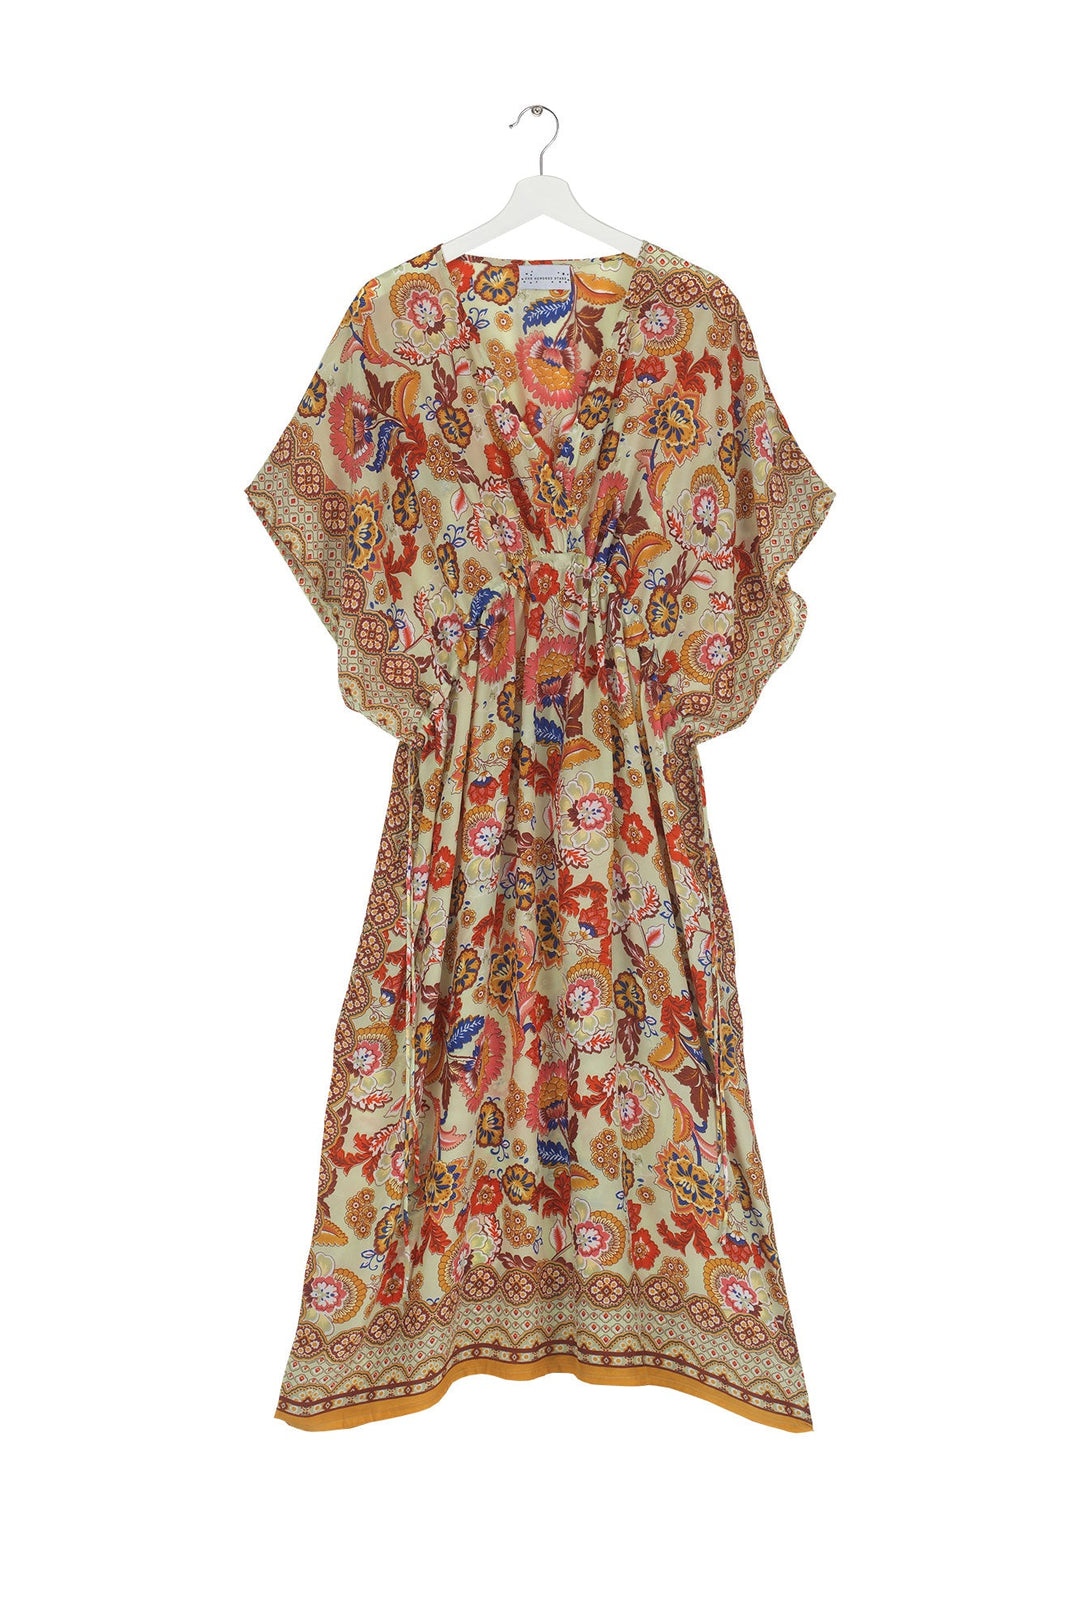 Women's lightweight beach cover up dress with tie waist  in taupe with Indian flower floral print by One Hundred Stars 